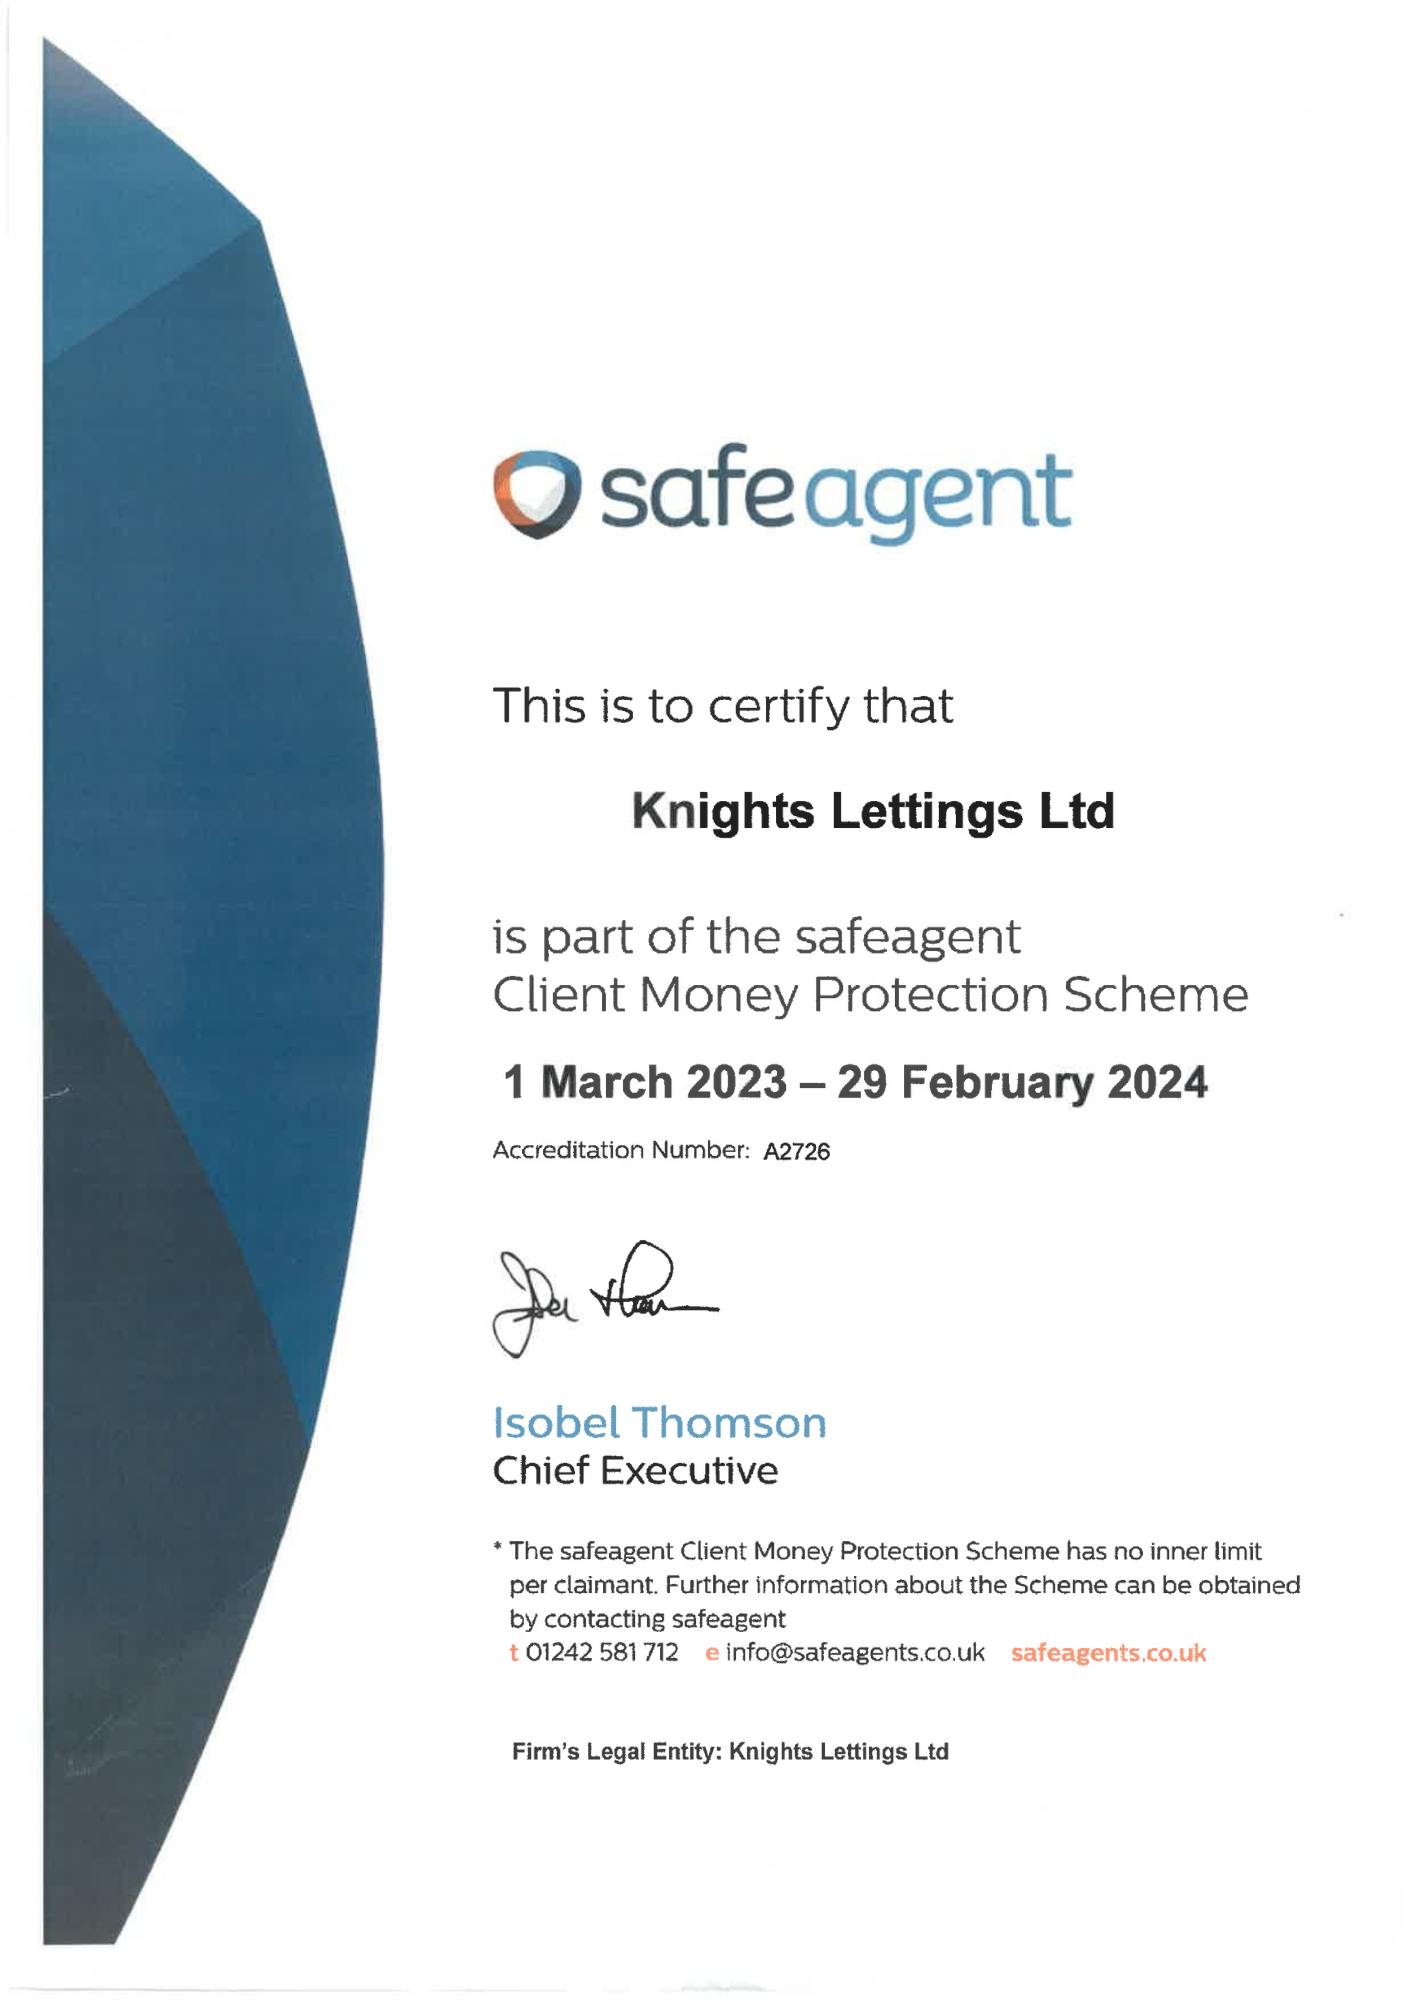 Knights Lettings certificate showing Knights Lettings are part of the Client Money Protection Scheme